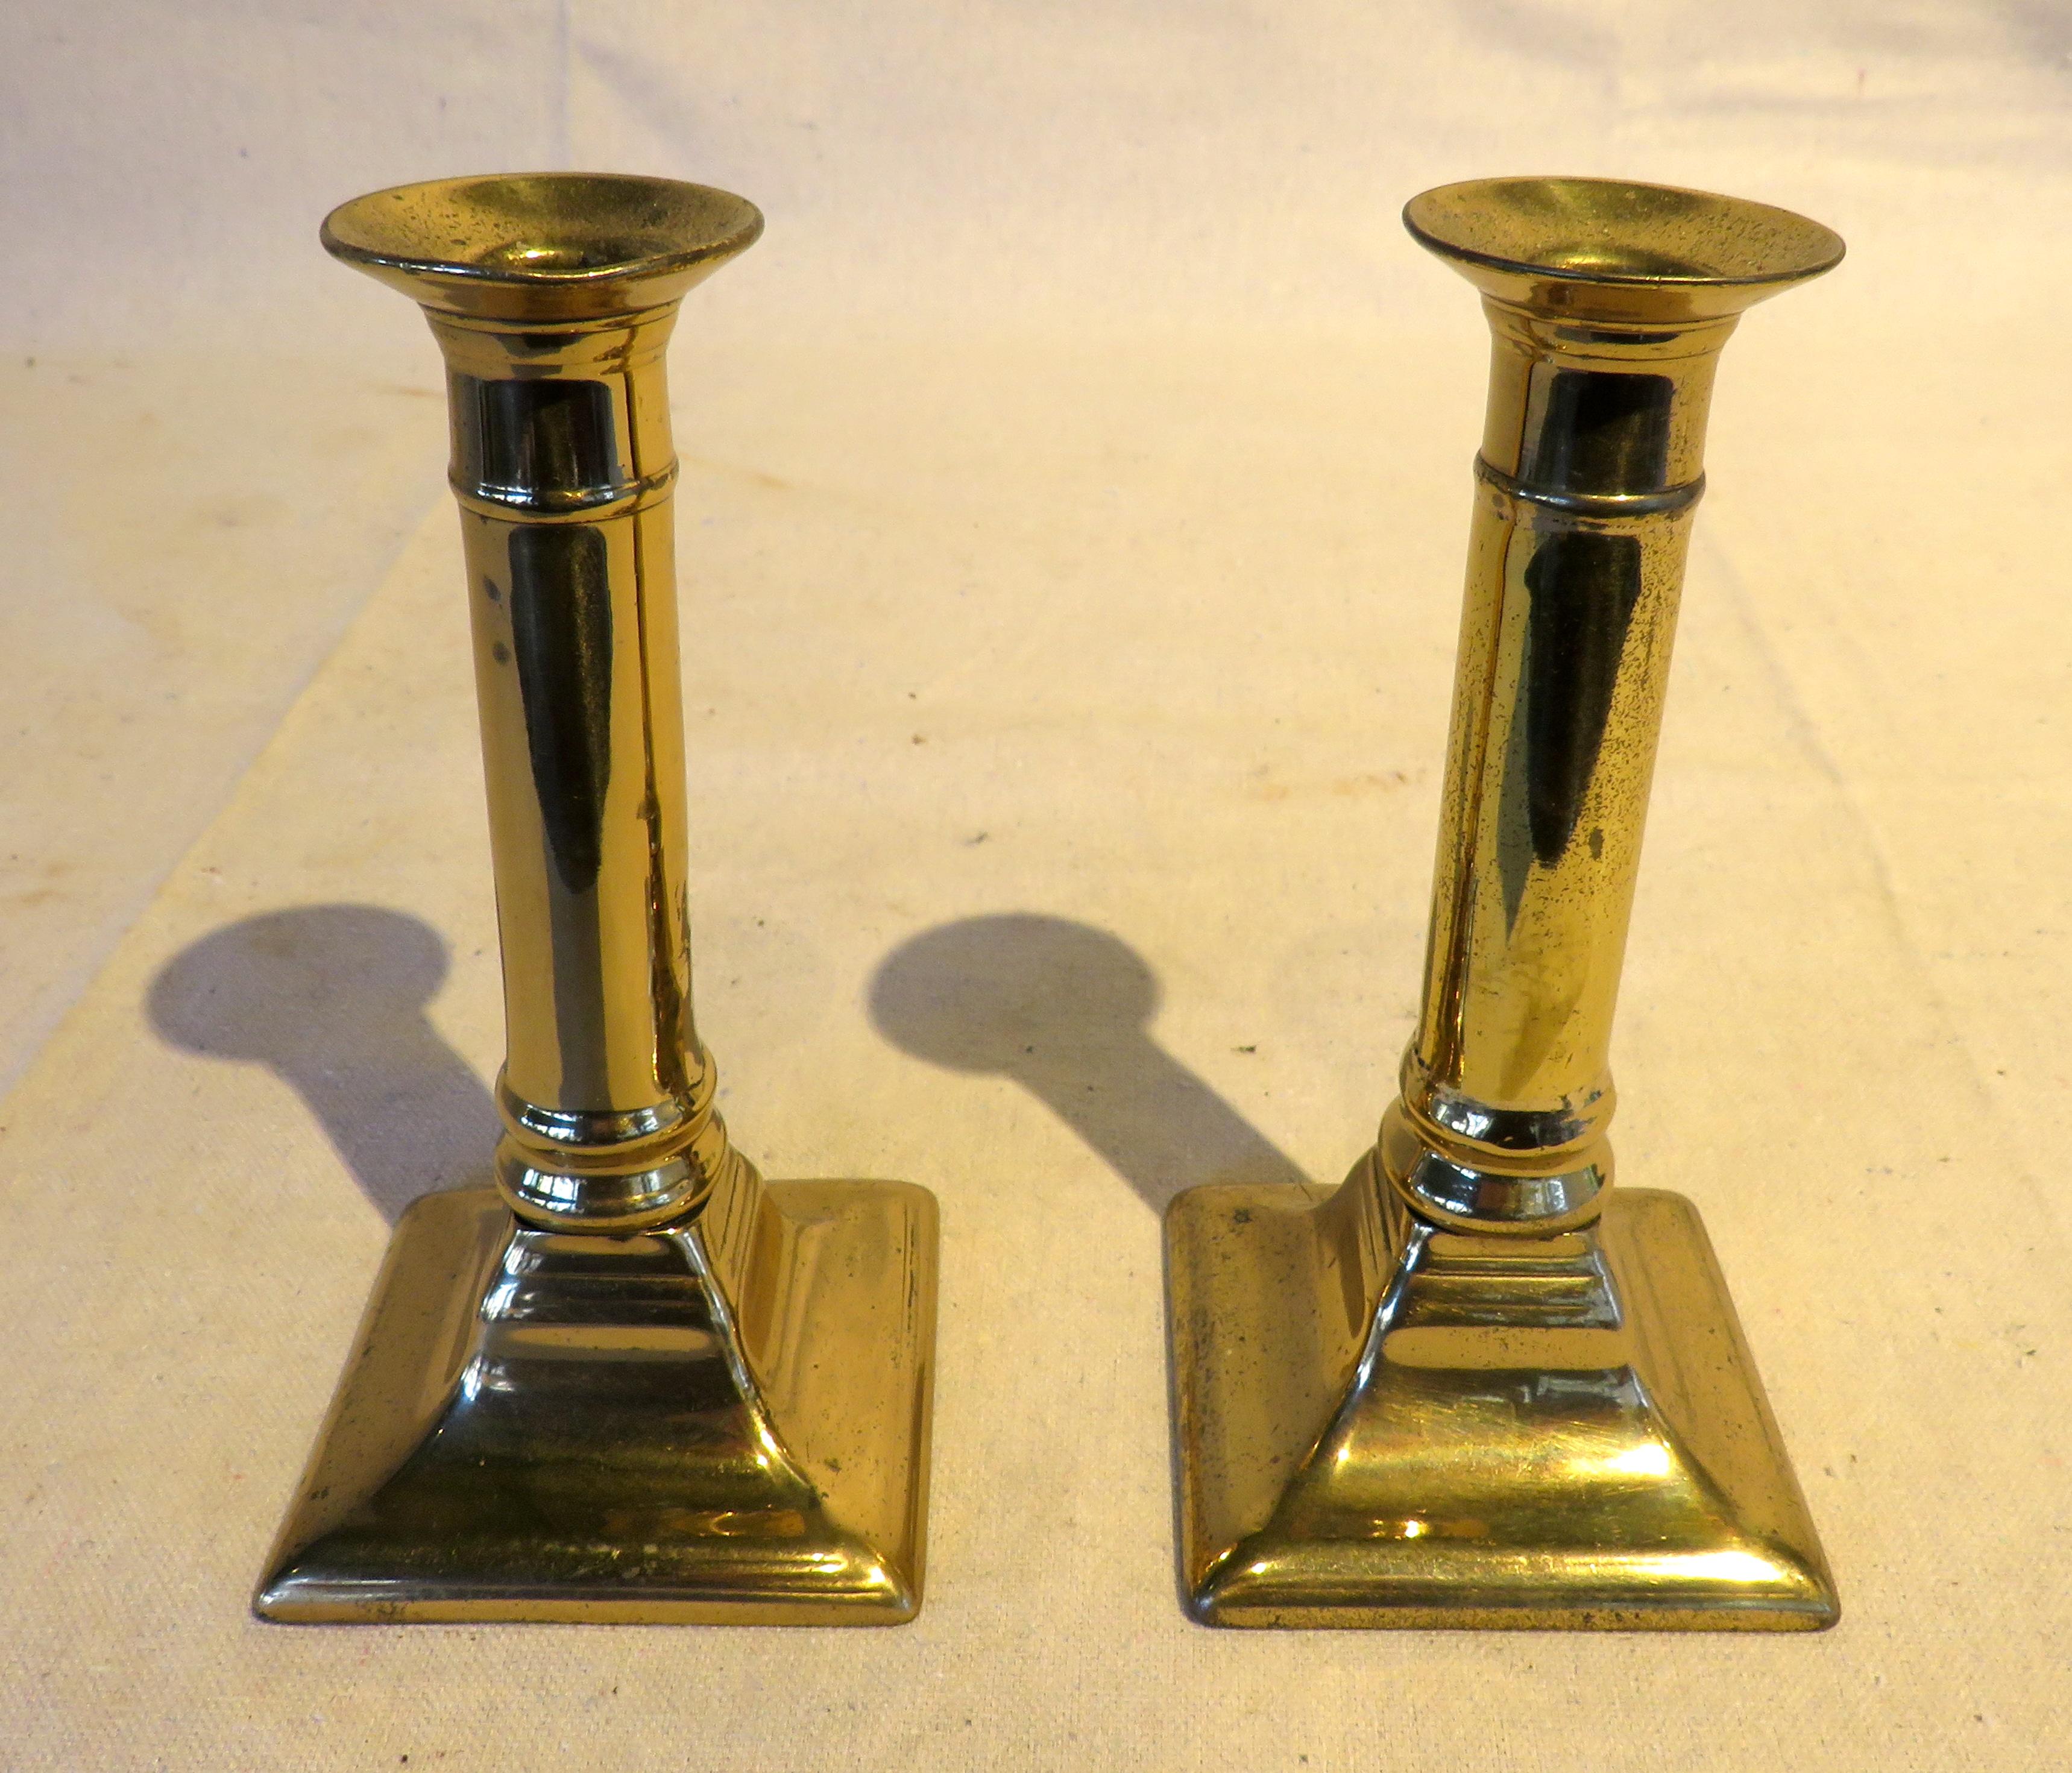 Pair of diminutive Federal brass candlesticks with push-up mechanism from England.